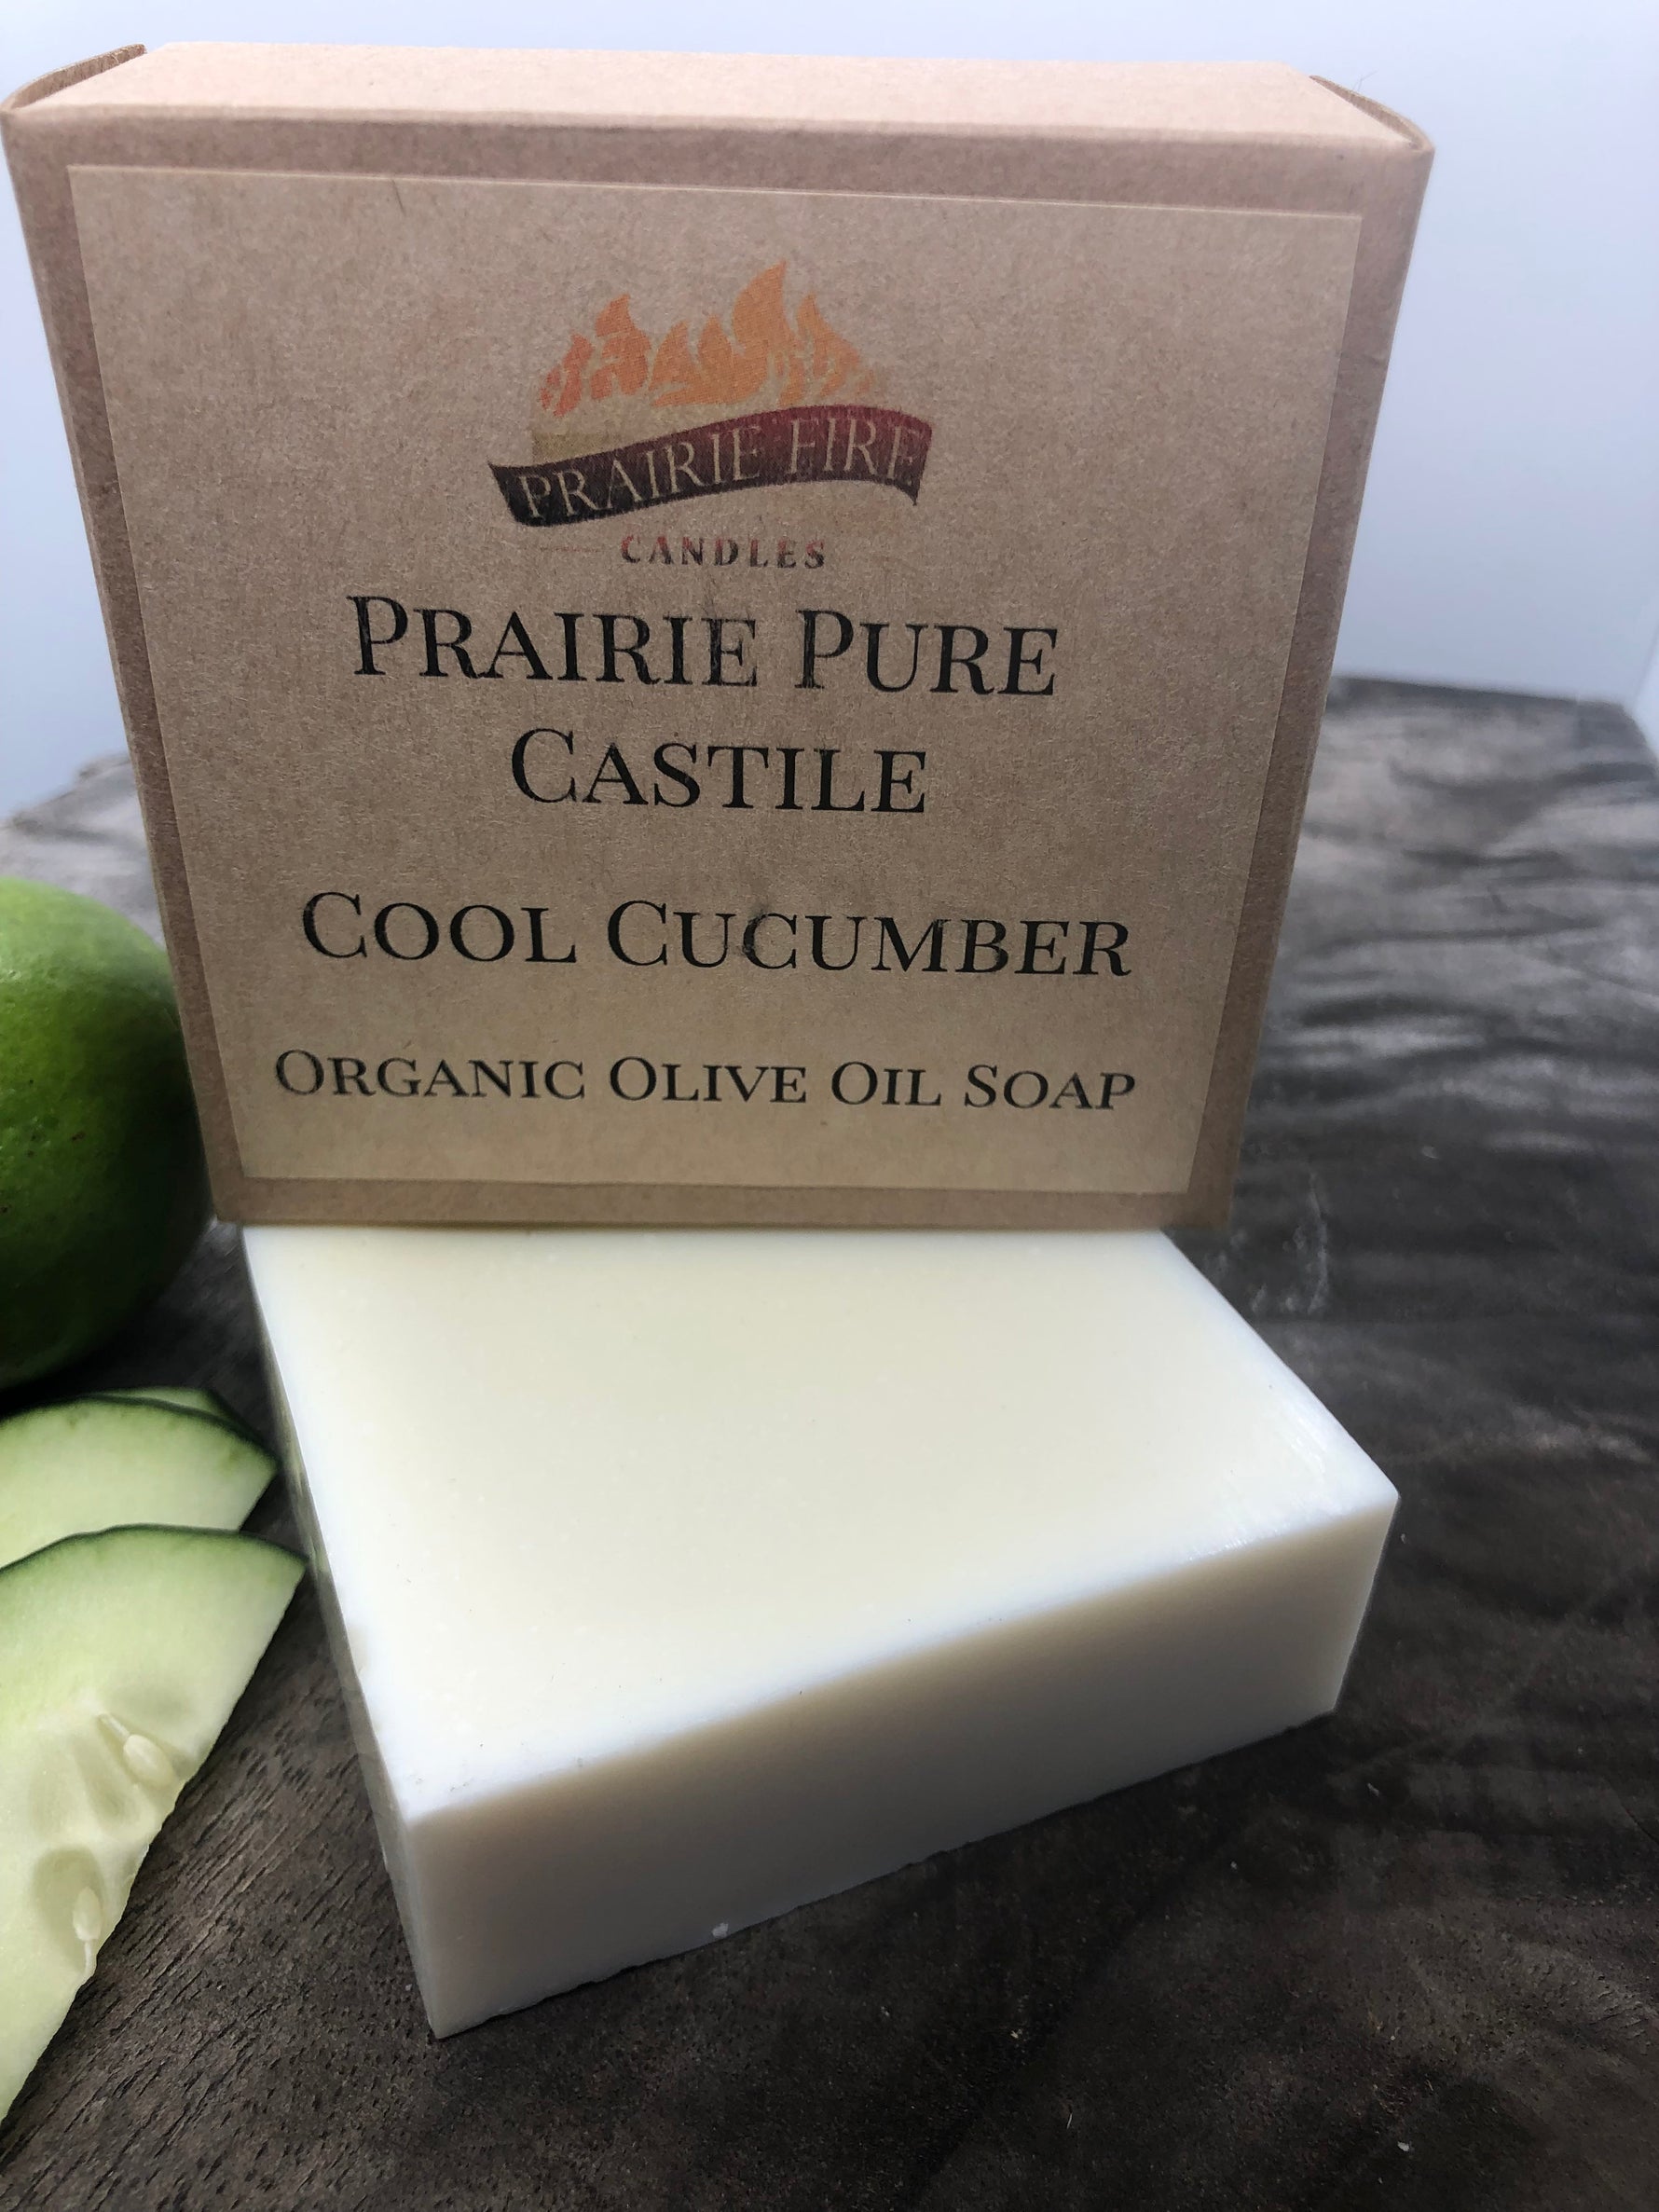 Cool Cucumber Real Castile Organic Olive Oil Soap for Sensitive Skin - Dye Free - 100% Certified Organic Extra Virgin Olive Oil-2